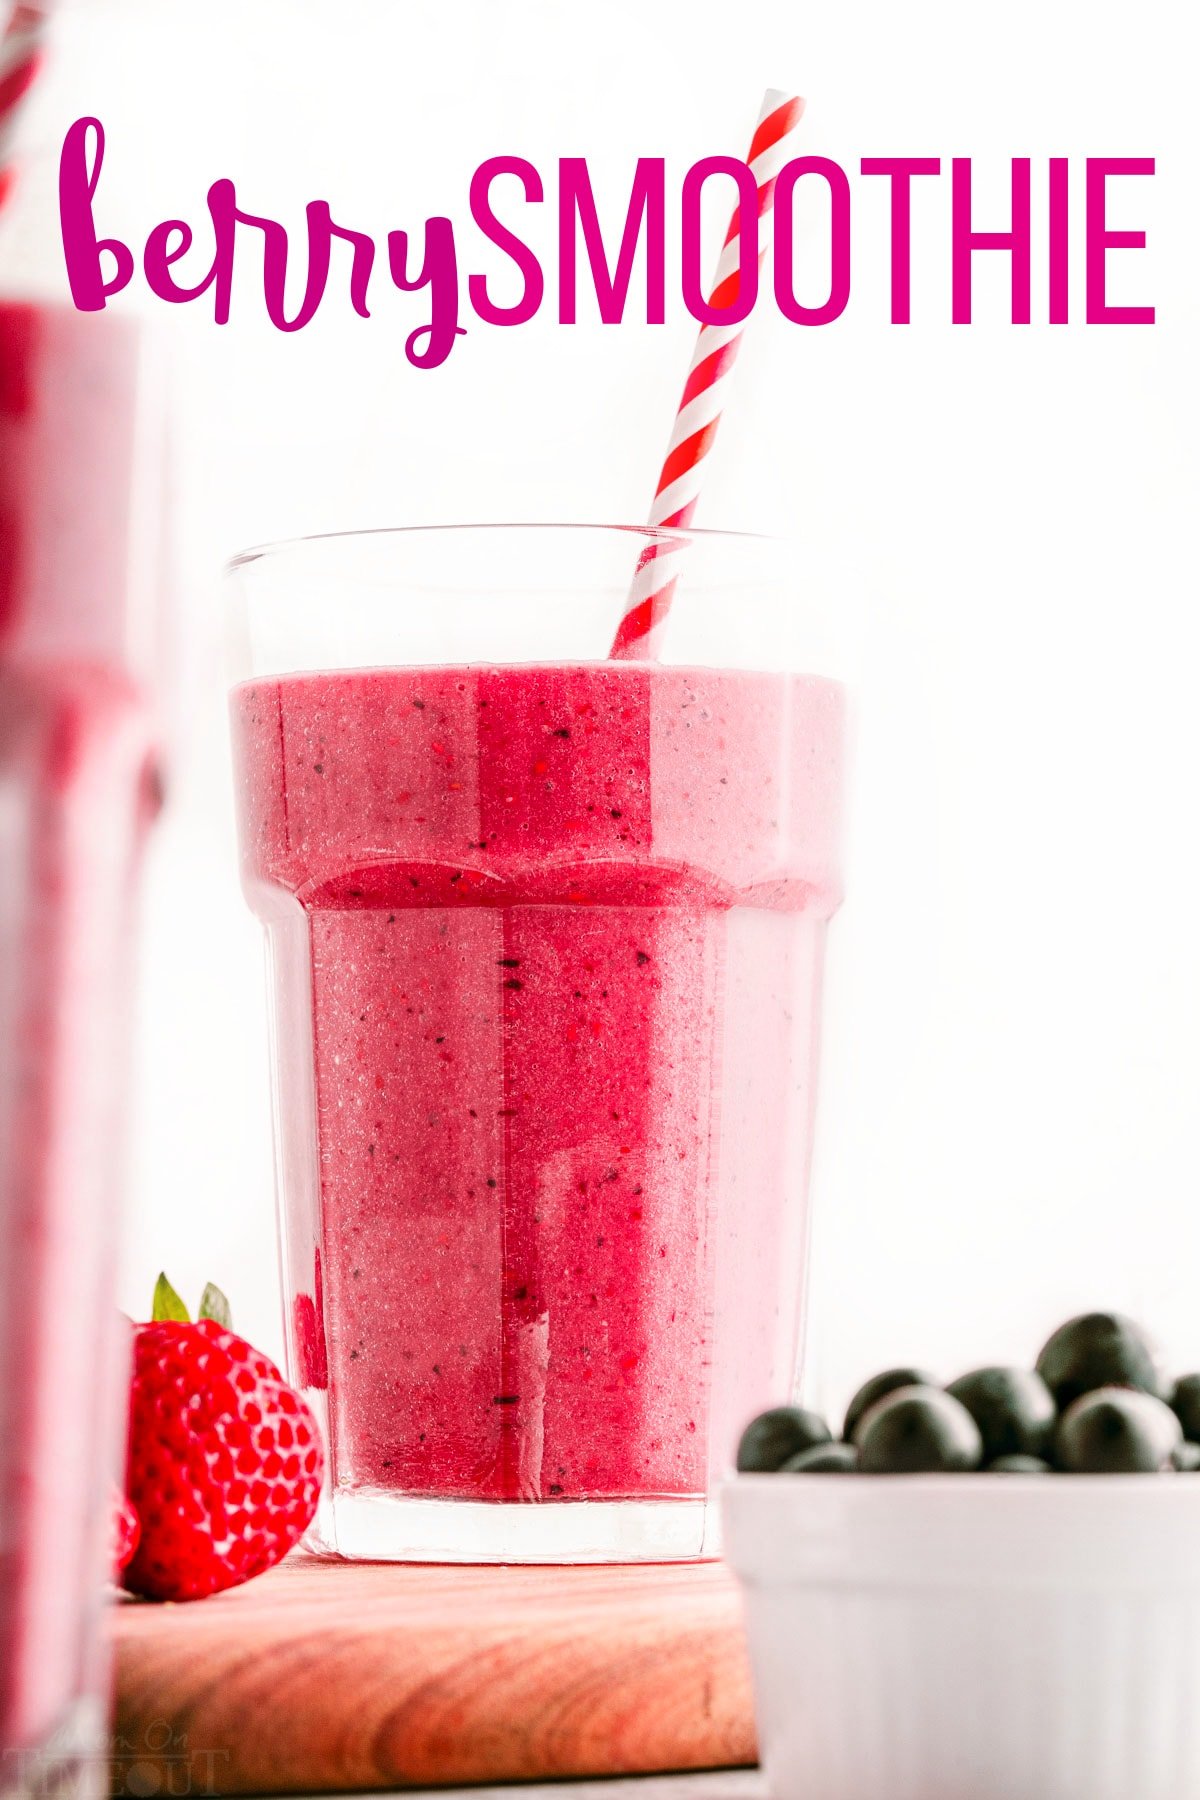 Mixed Berry Smoothie Recipe - Berry Delicious!